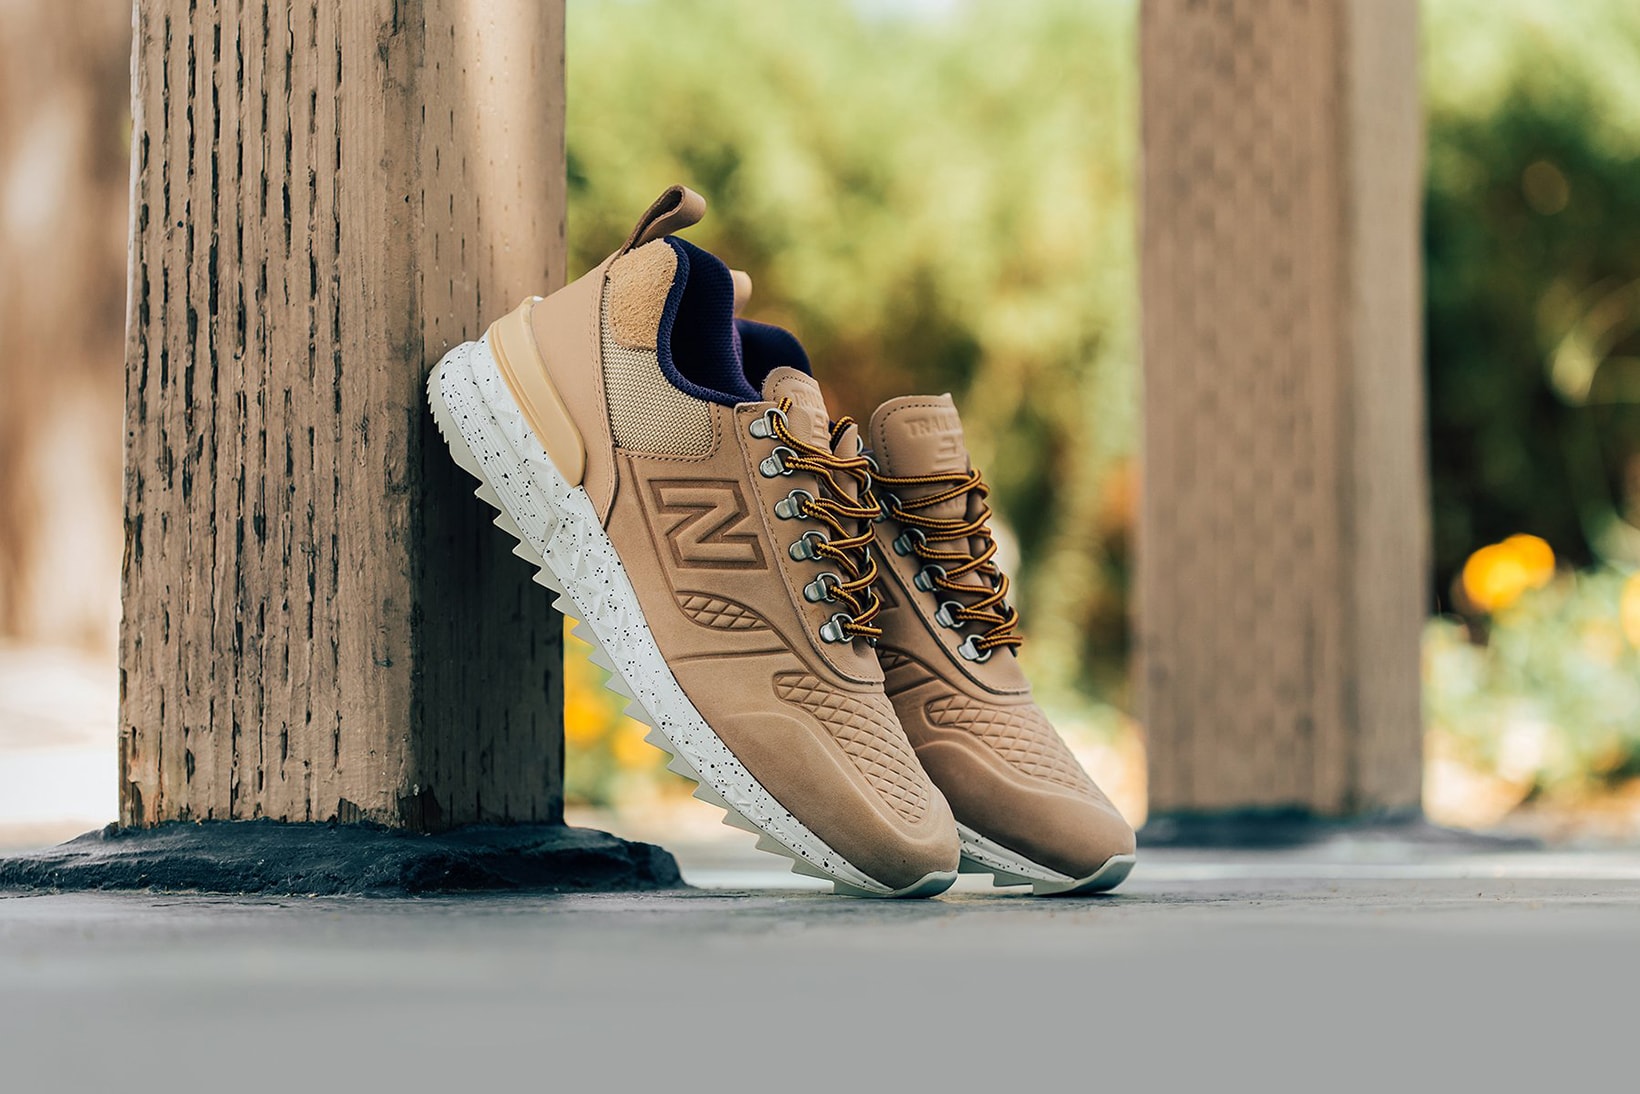 New Balance Trailbuster Dune Sneakers Shoes Footwear Feature